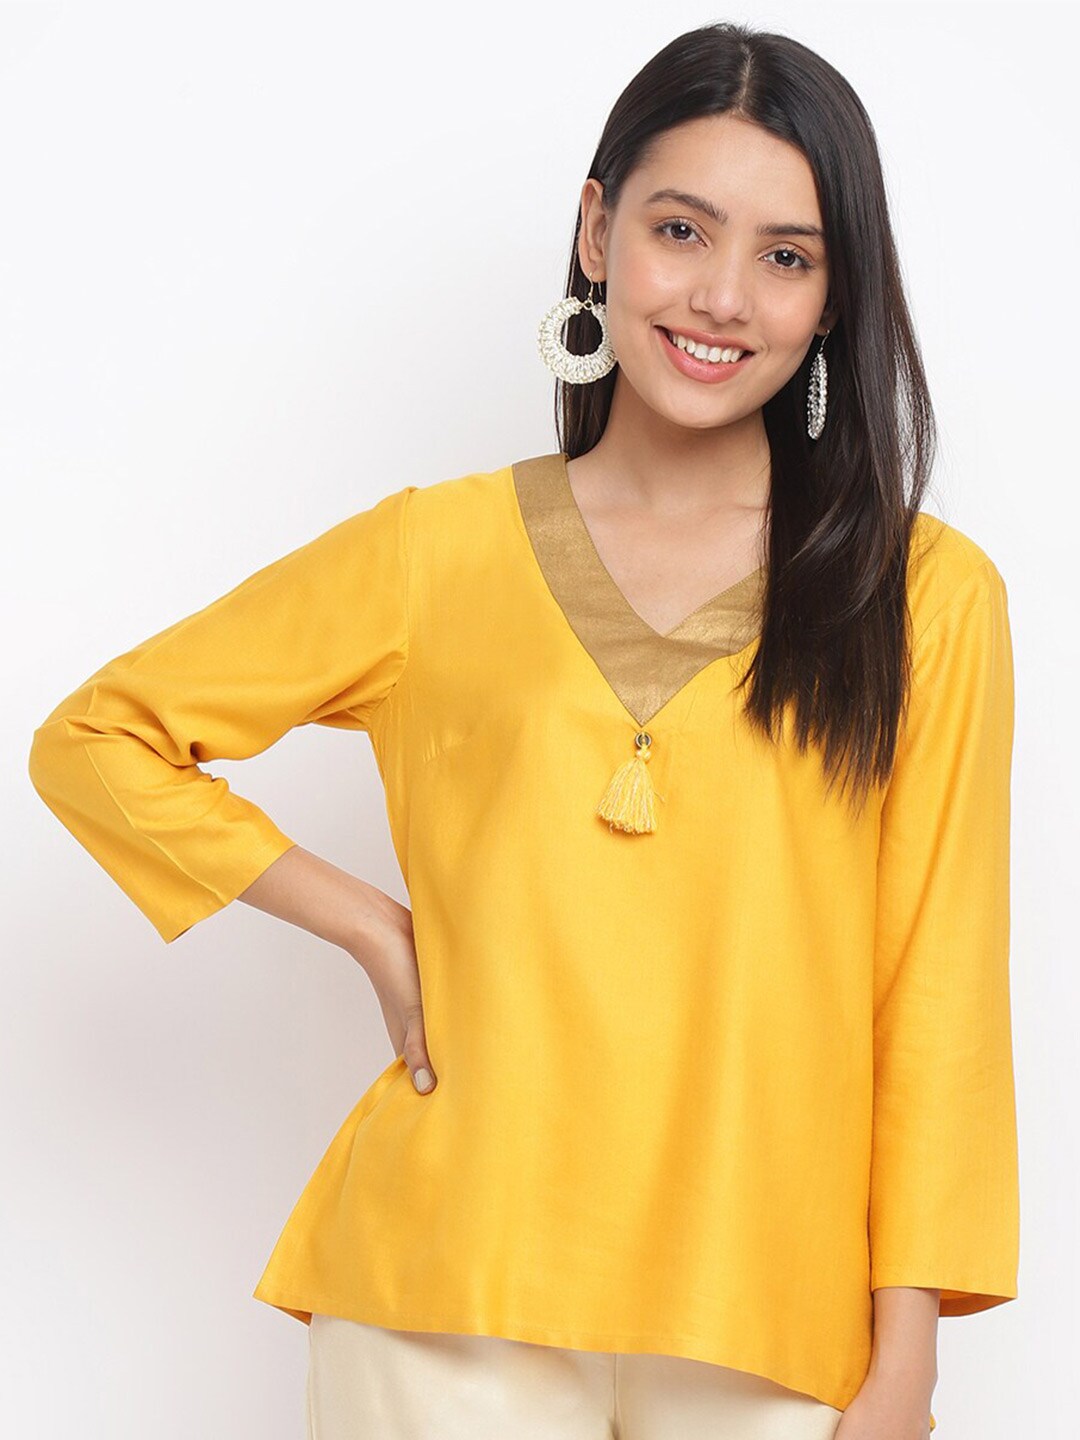 Fabindia Women Yellow Solid A-Line Top Price in India